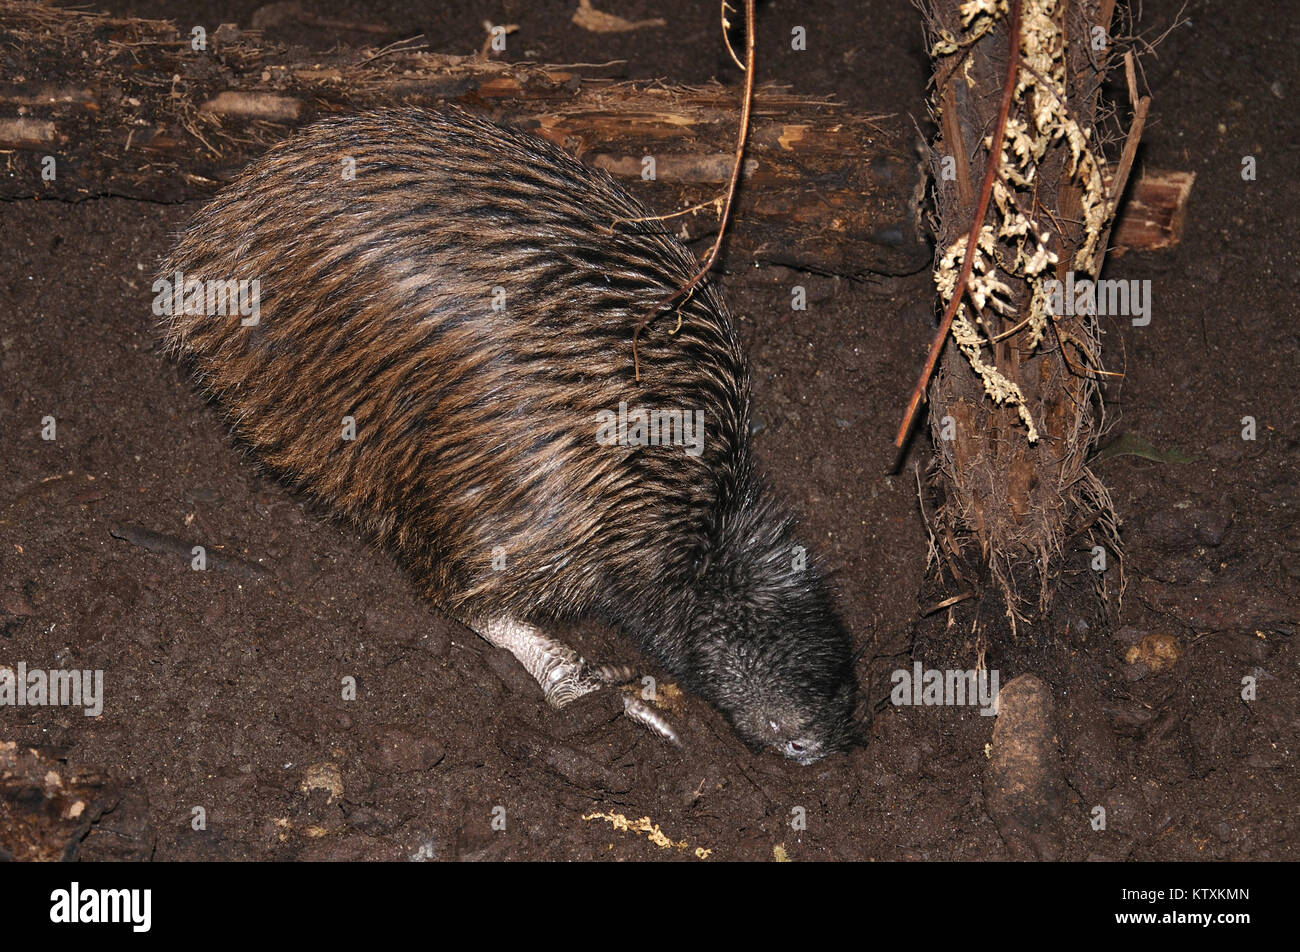 North Island brown kiwi, Apteryx australis, buries its beak in the ground, searching for food, New Zealand Stock Photo